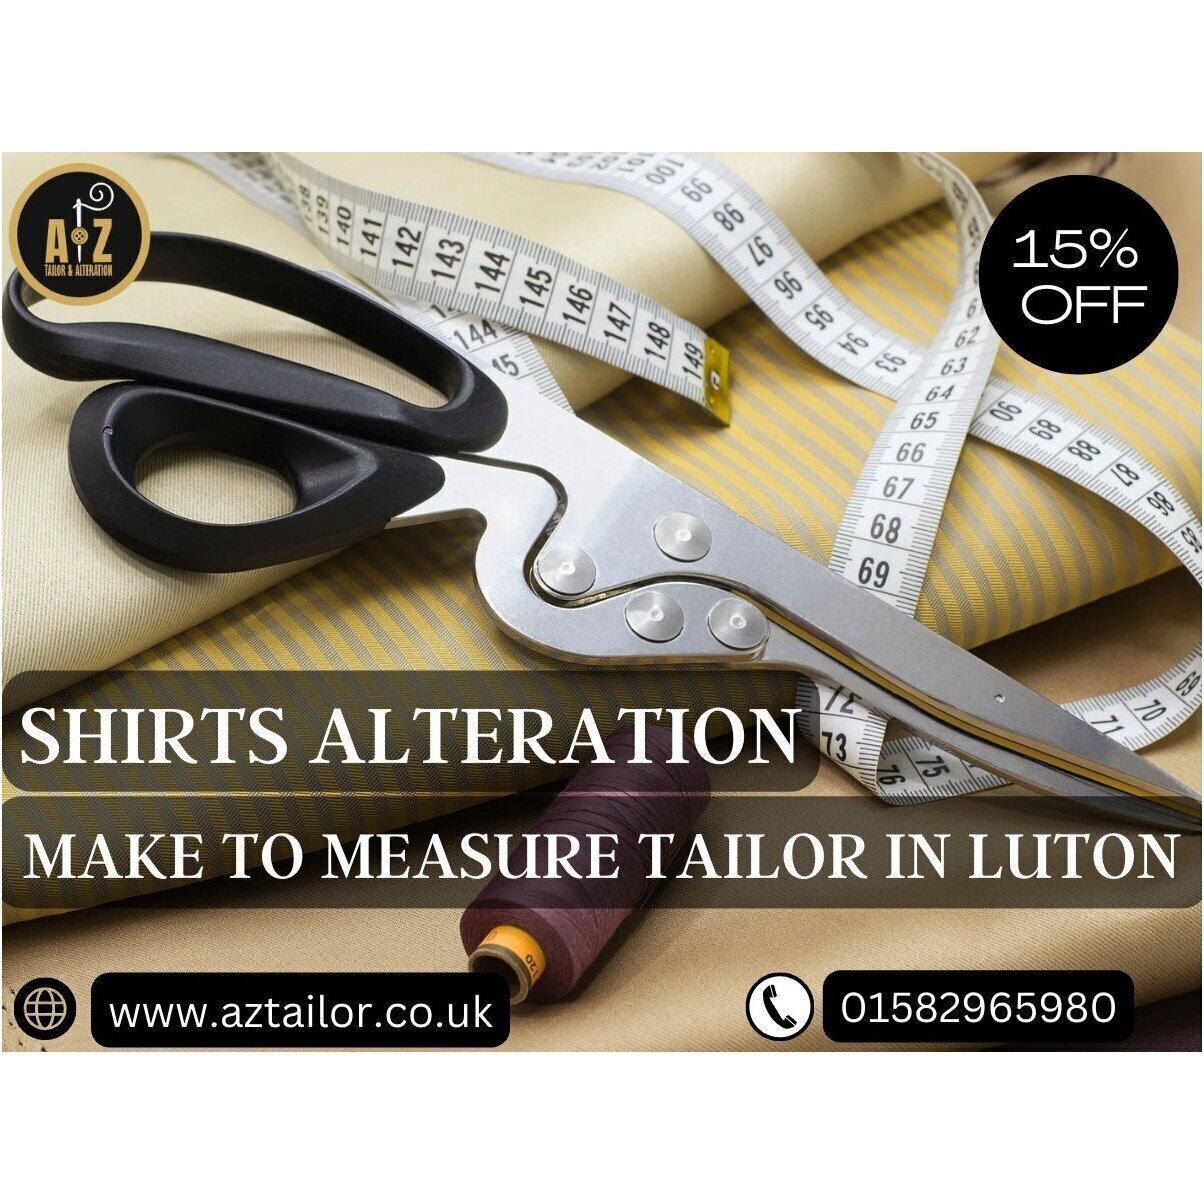 Images A & Z Tailor & Alteration Best Wedding & Bespoke Tailoring Luton